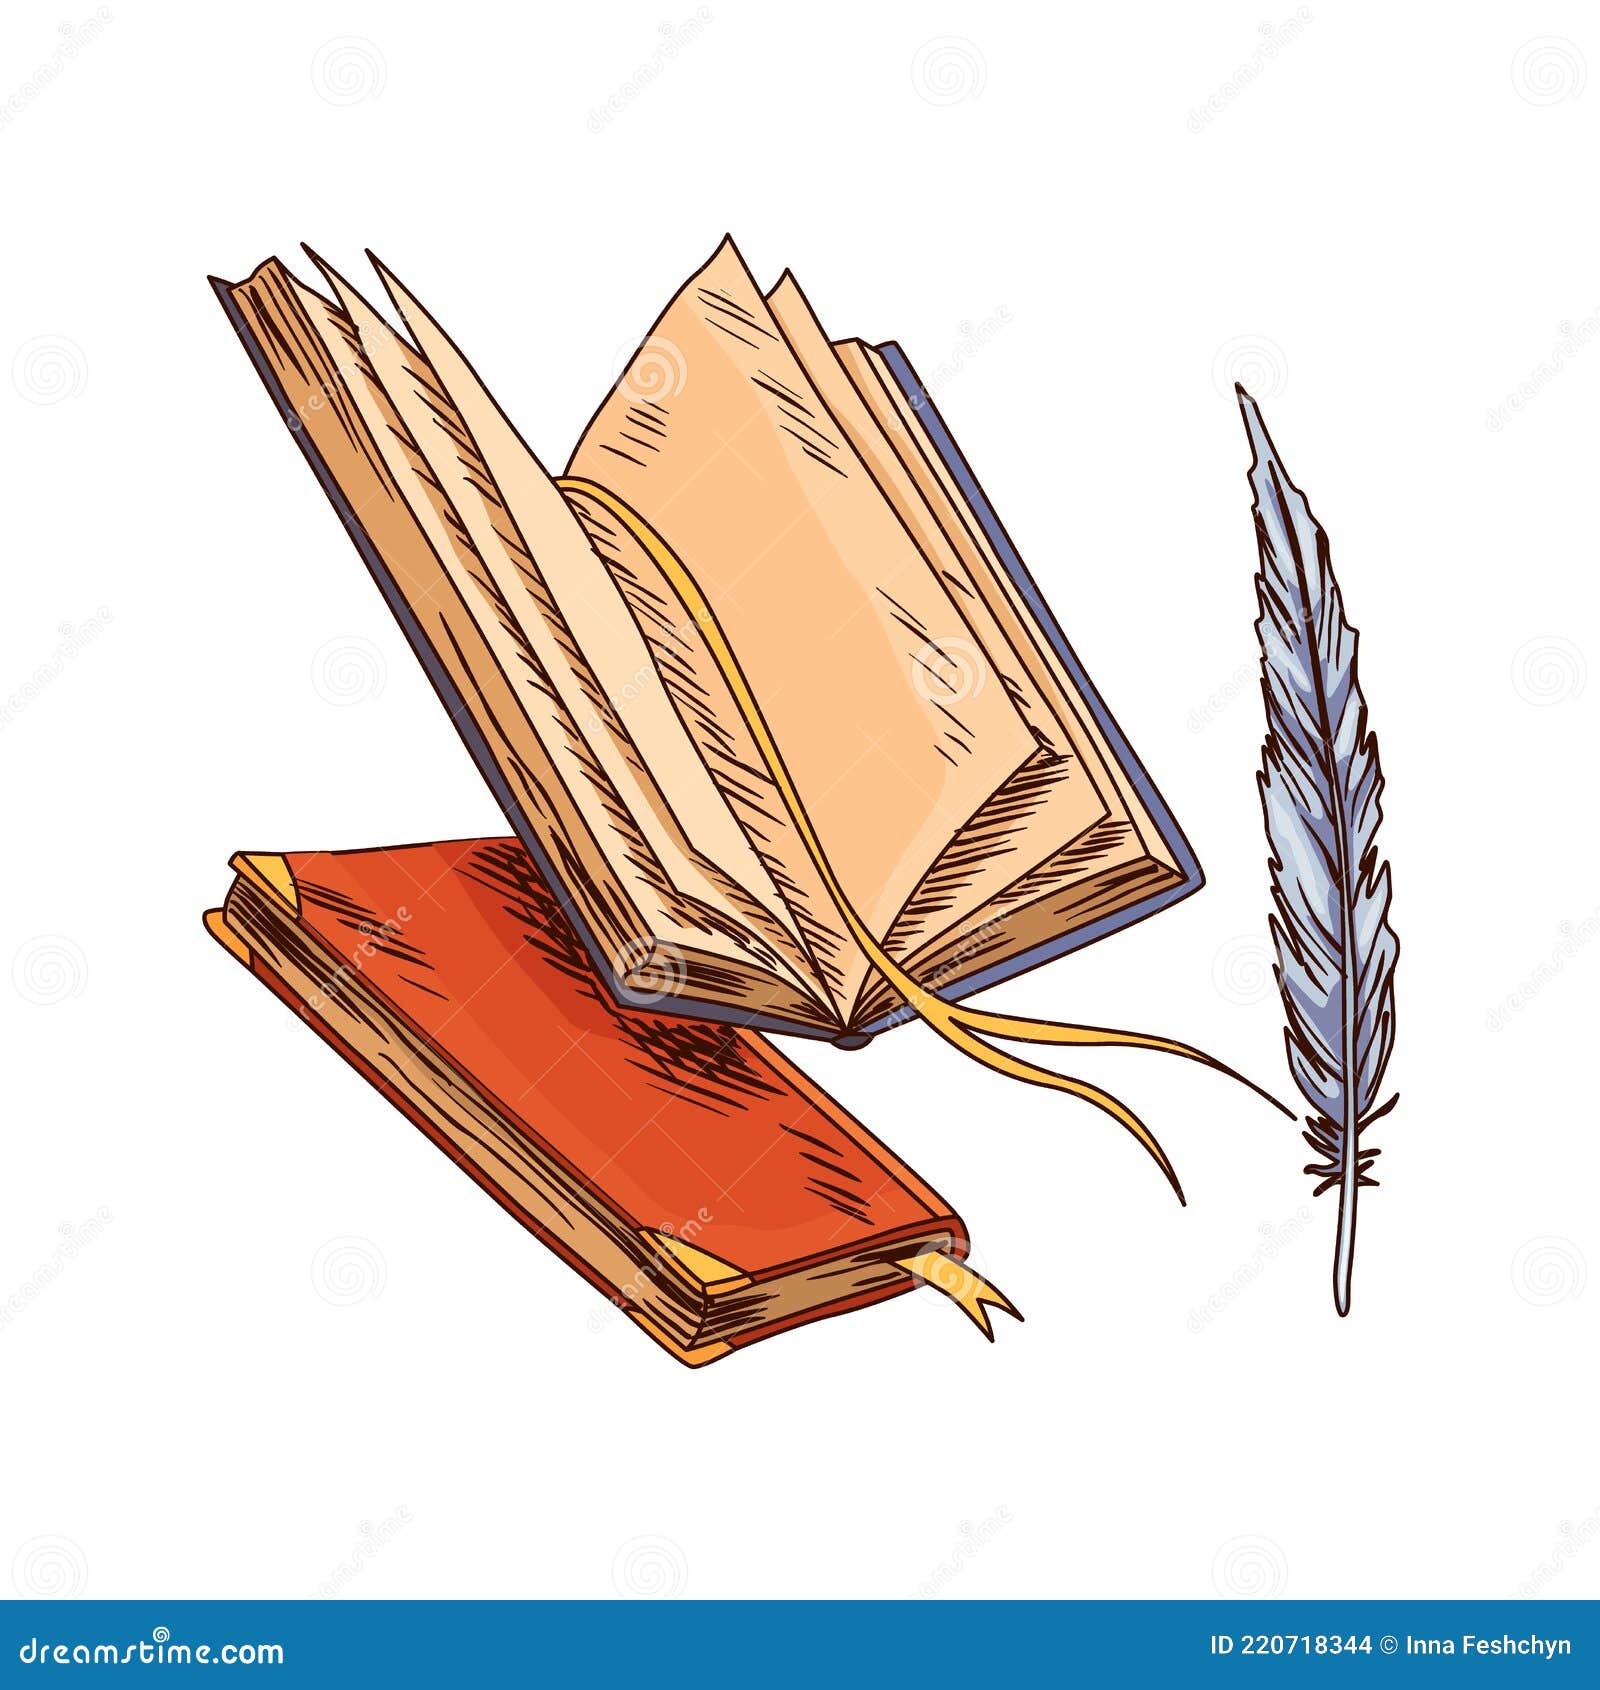 Open book clipart, vintage stationery